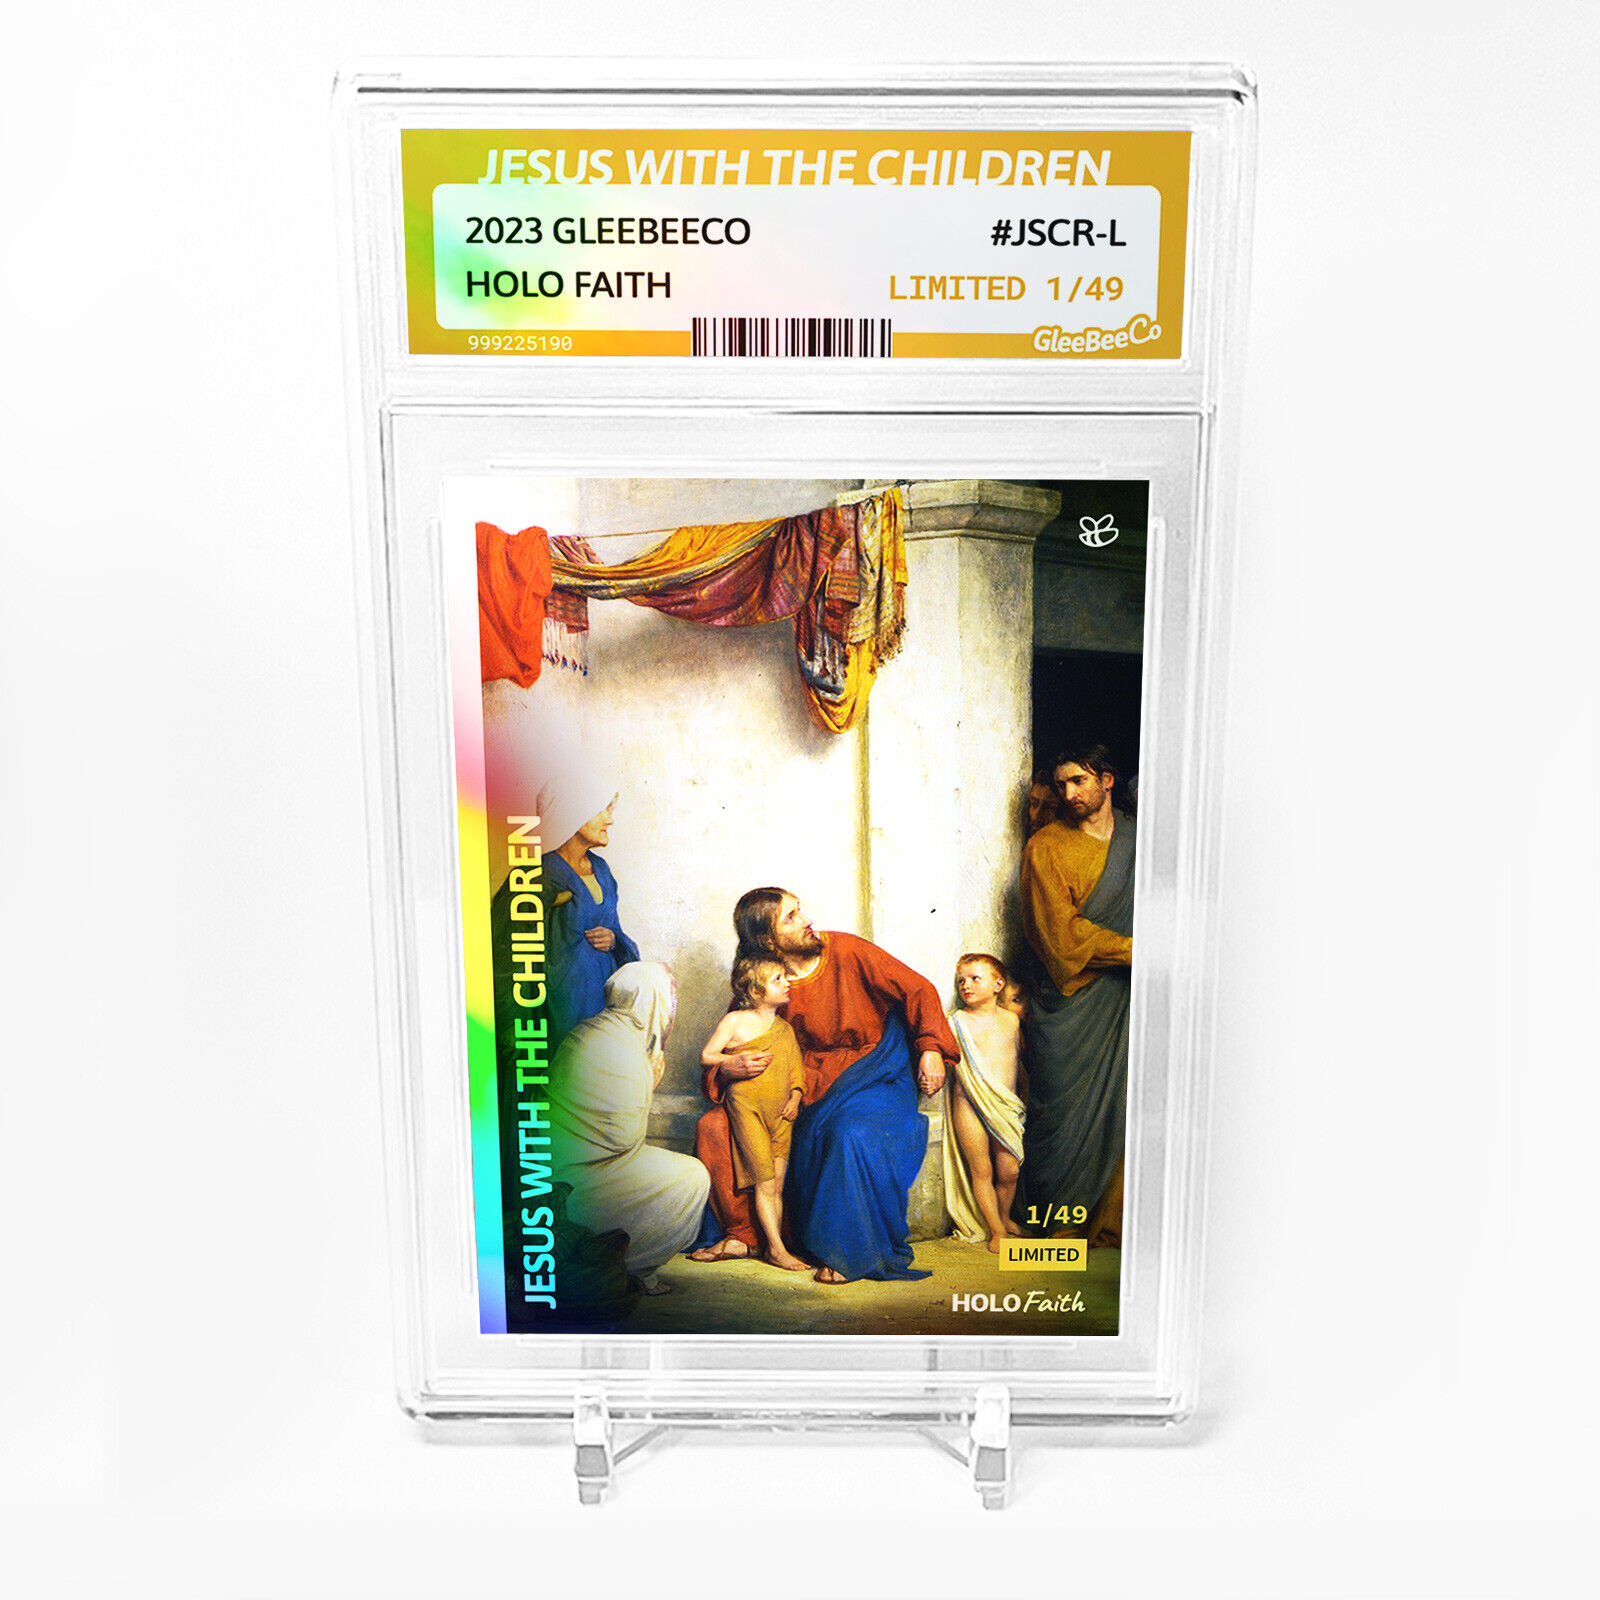 JESUS WITH THE CHILDREN Carl Bloch Card 2023 GleeBeeCo Holo Faith #JSCR-L /49